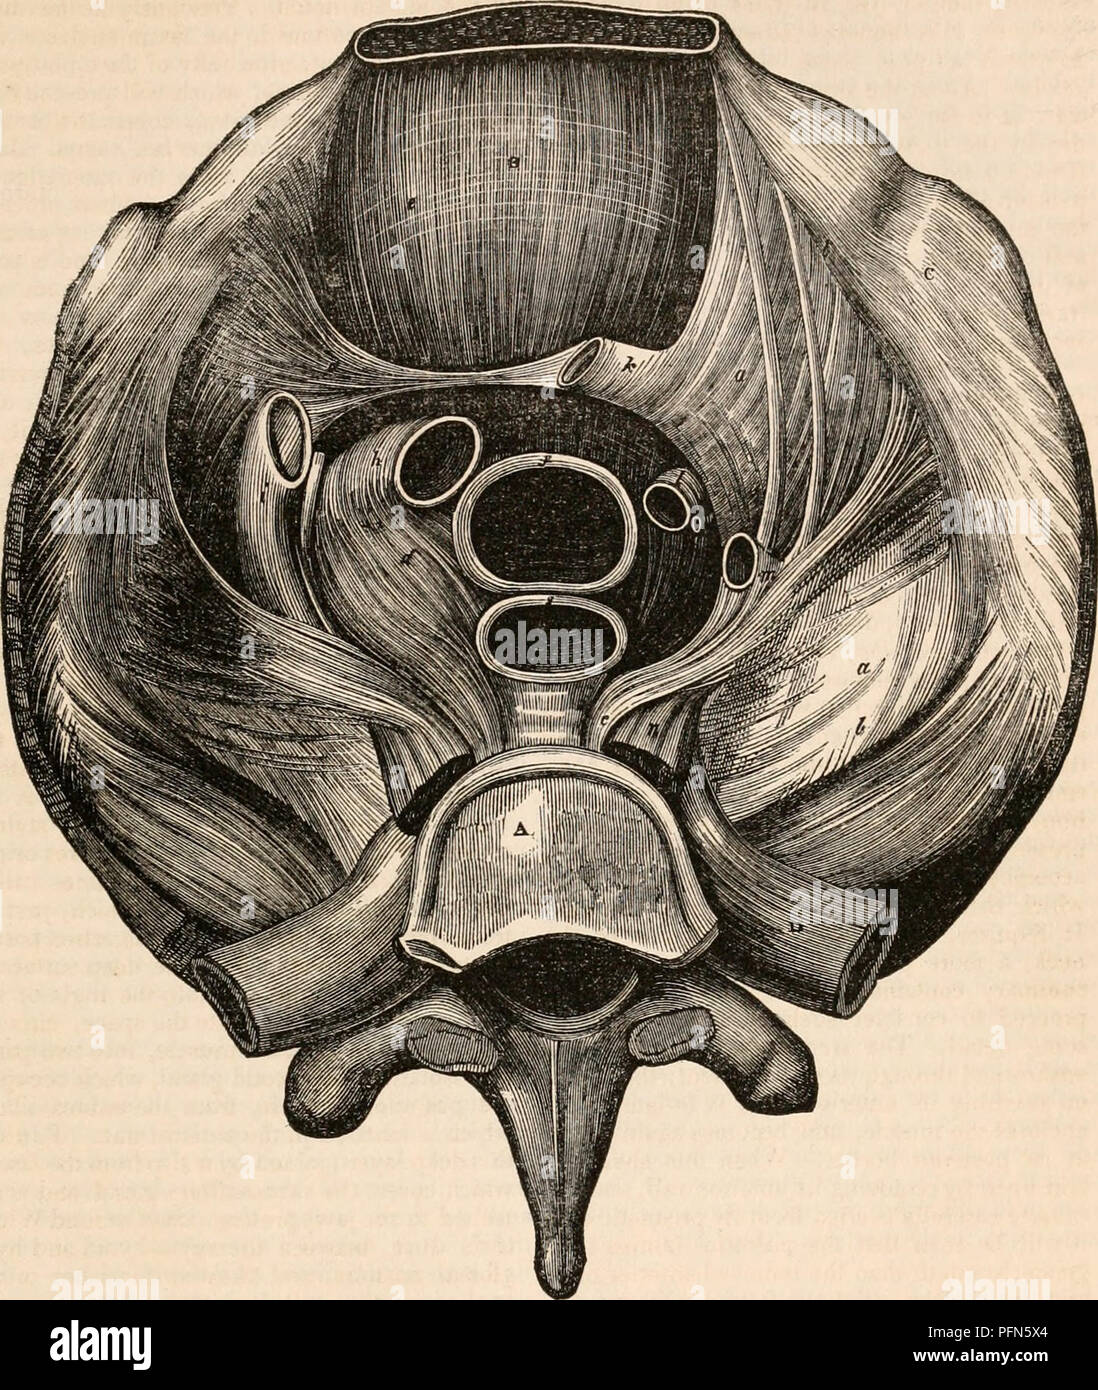 . The cyclopædia of anatomy and physiology. Anatomy; Physiology; Zoology. NECK. Fig. 328. 569. Shews from below the cervico-thoracic septum constituting the roof of the thorax, and giving passage to the great vessels. It represents a transverse and horizontal section through the second intervertebral disc, and parts at the same level. A, second dorsal vertebra. B, tranverse division of the manubrium sterni. C, first ribs. D, vertebral extremity of second ribs. a, a, fascia, extending between the great vessels and first two ribs. b, b, its insertion at the first ribs. c, c, its insertion at the Stock Photo